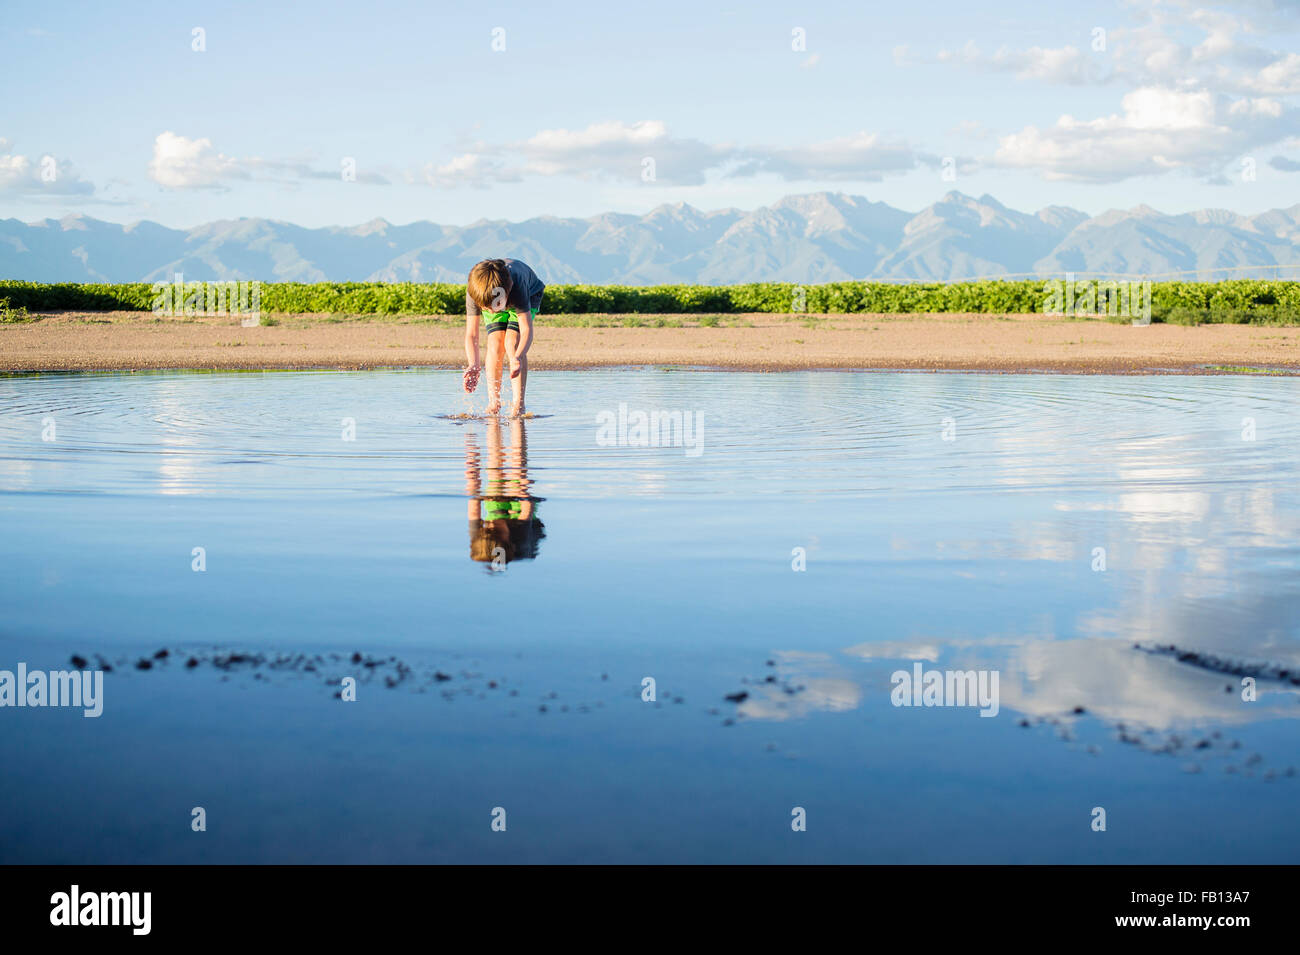 Boy (6-7) wading in water Stock Photo